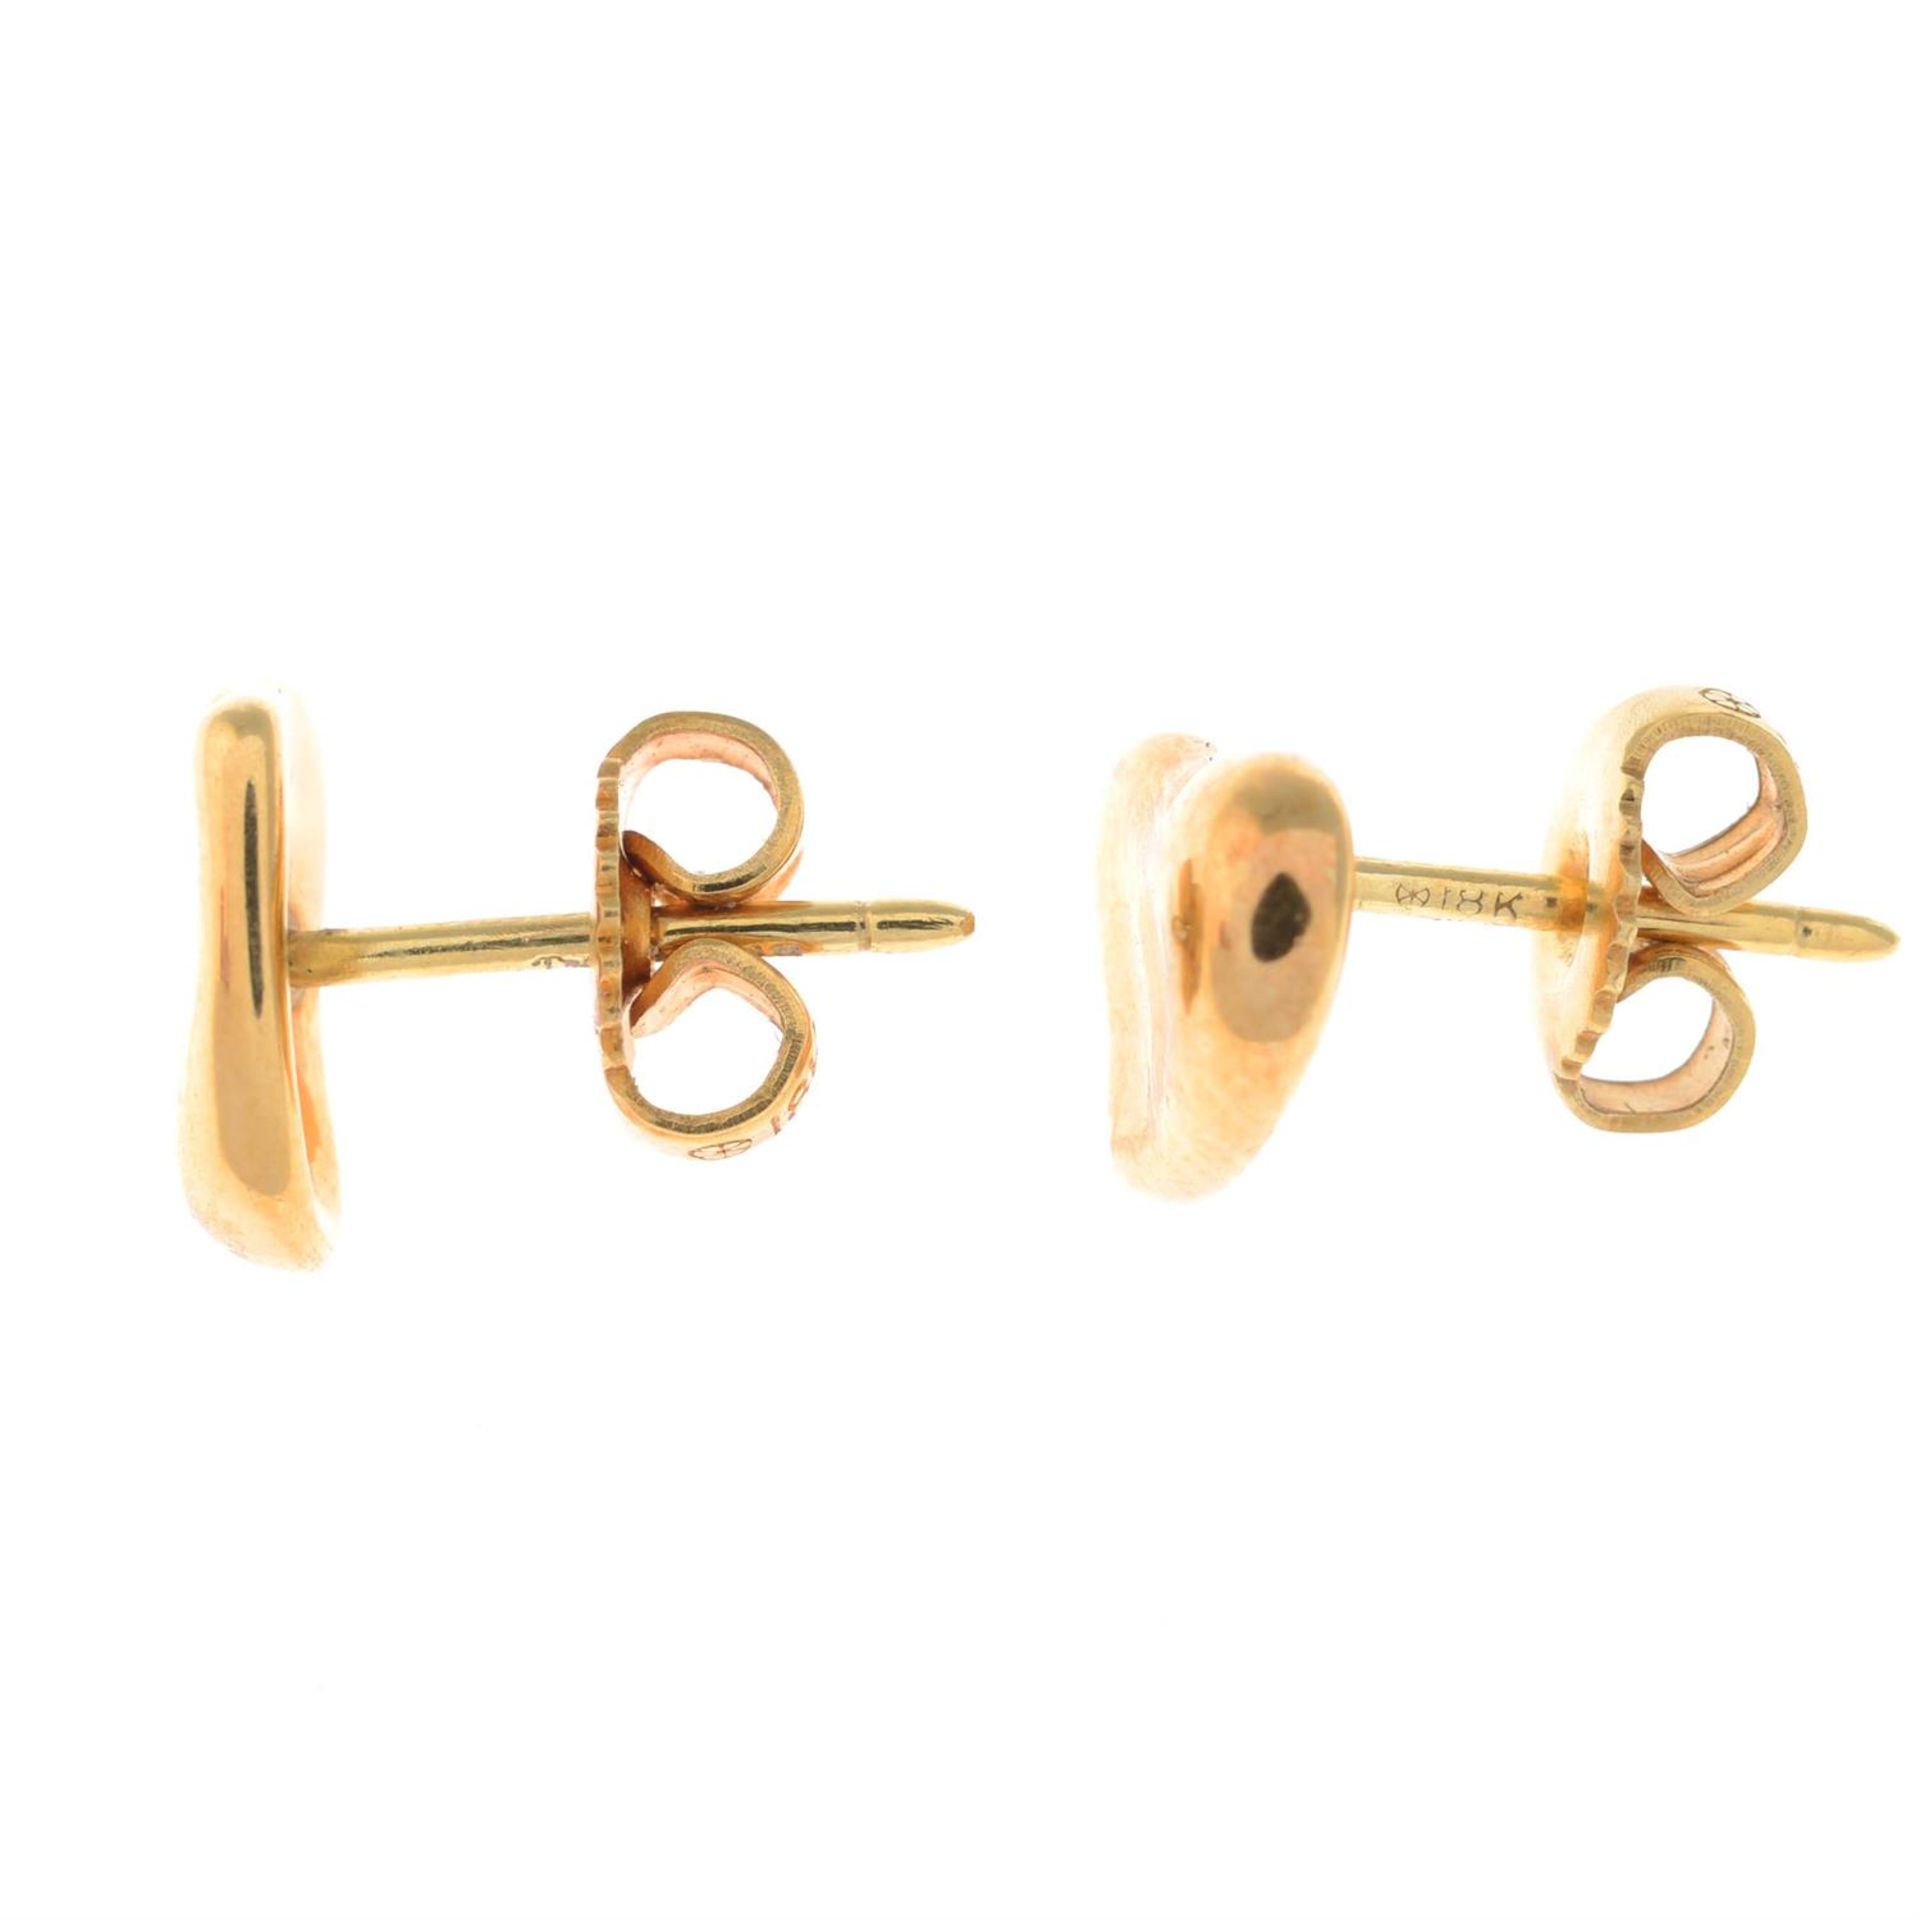 A pair of 'Full Heart' stud earrings, by Elsa Peretti for Tiffany & Co. - Image 3 of 3